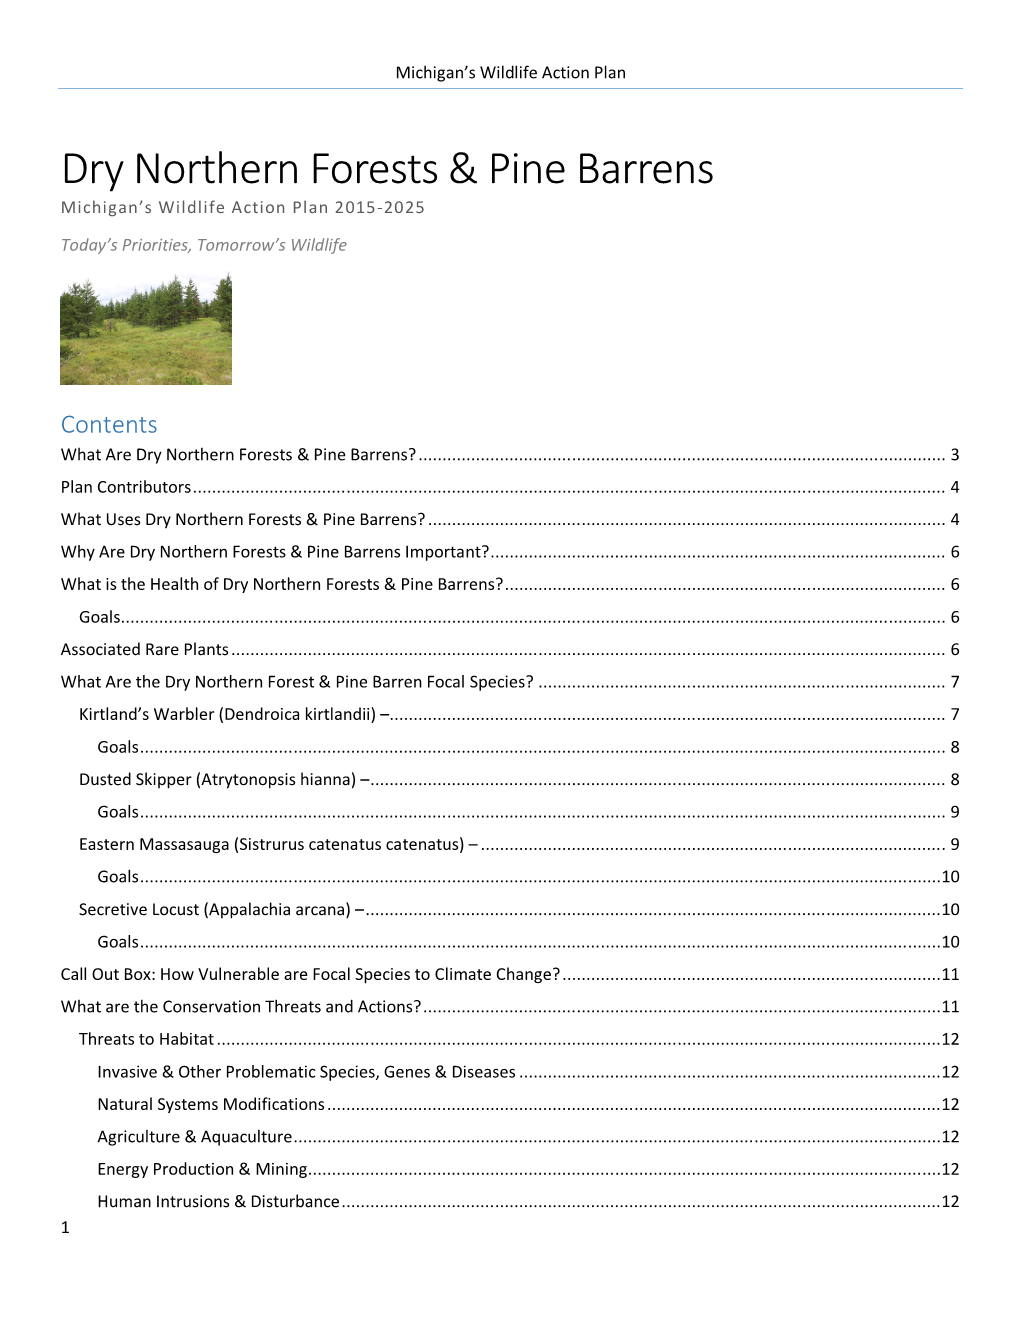 Dry Northern Forests & Pine Barrens